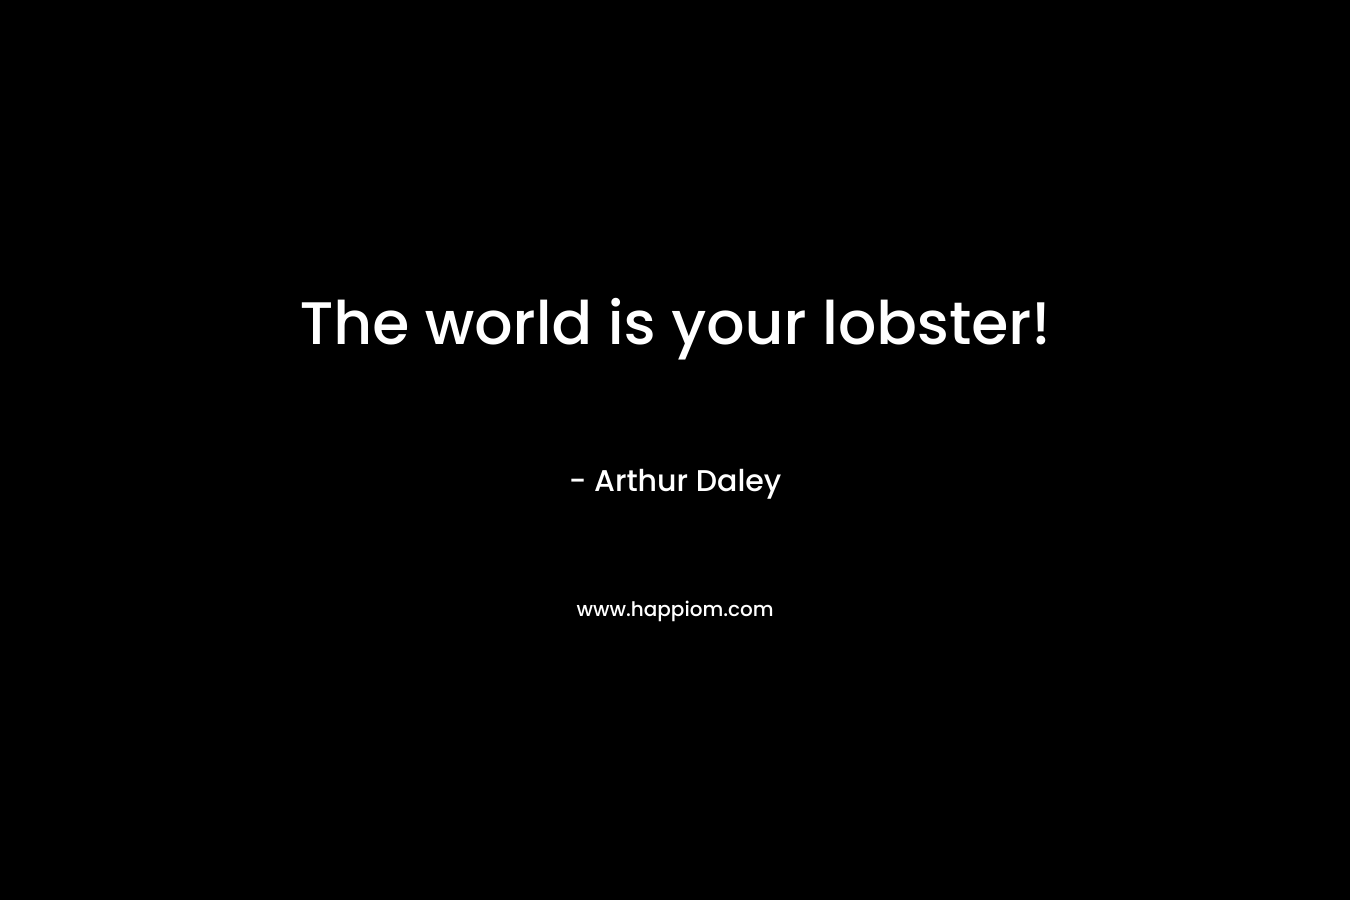 The world is your lobster! – Arthur Daley